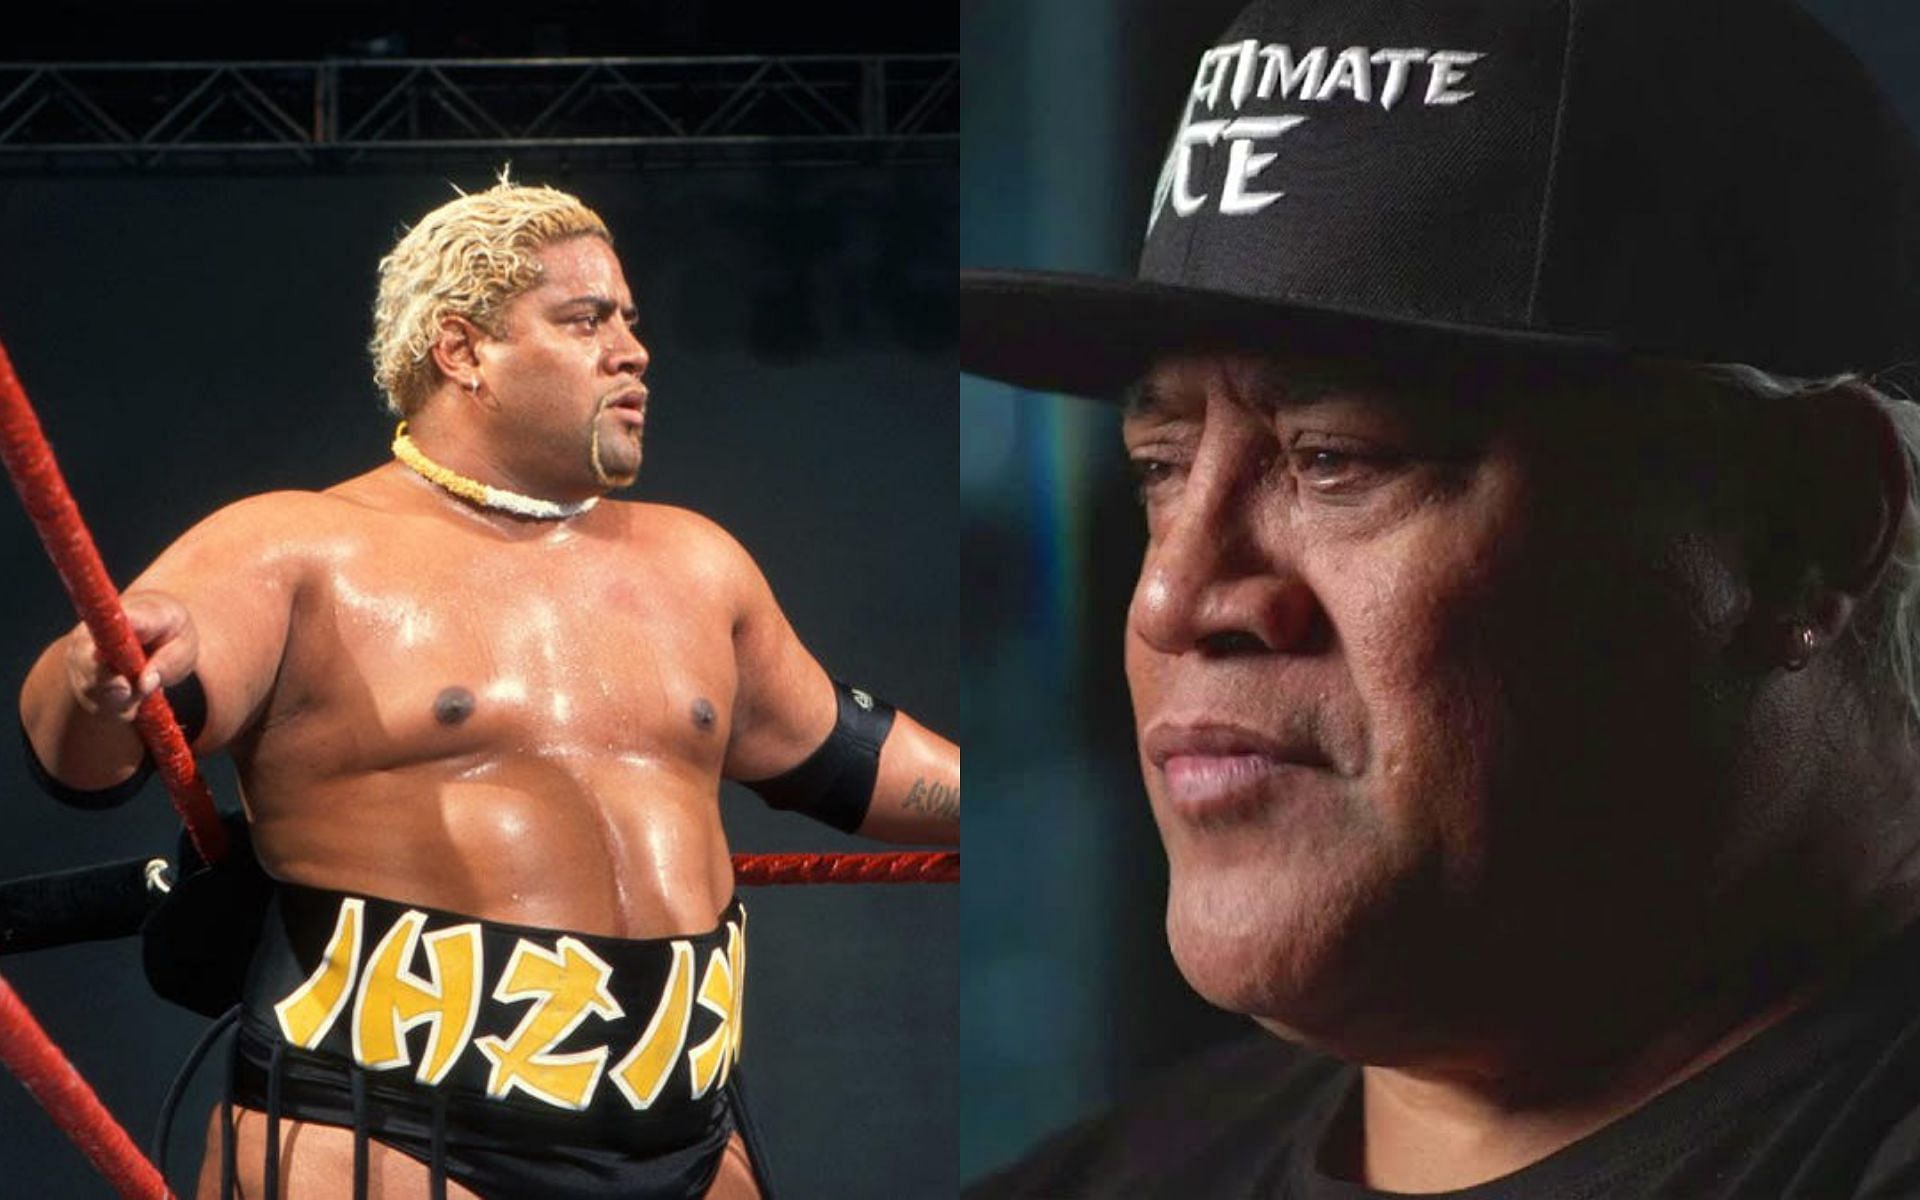 Rikishi had a terrifying incident take place that changed his life forever